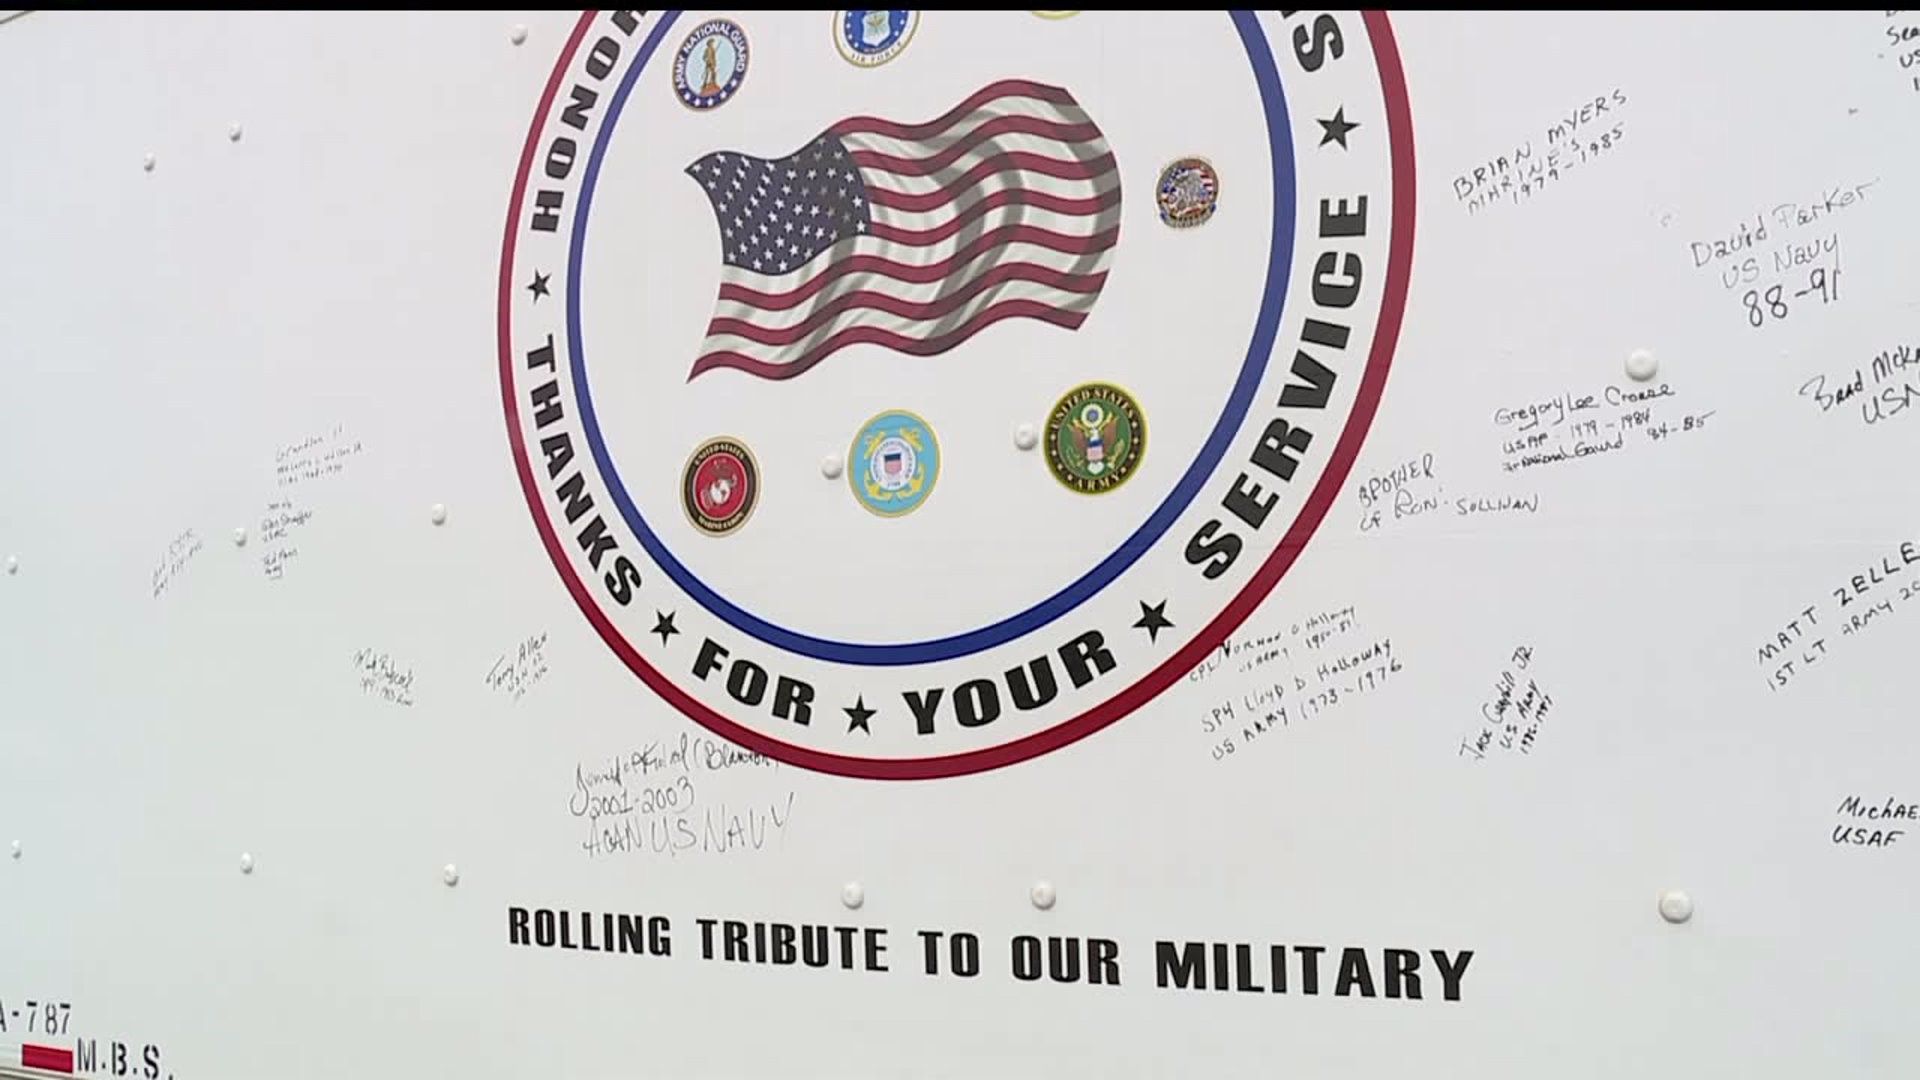 Box truck carries names of military veterans across Central PA